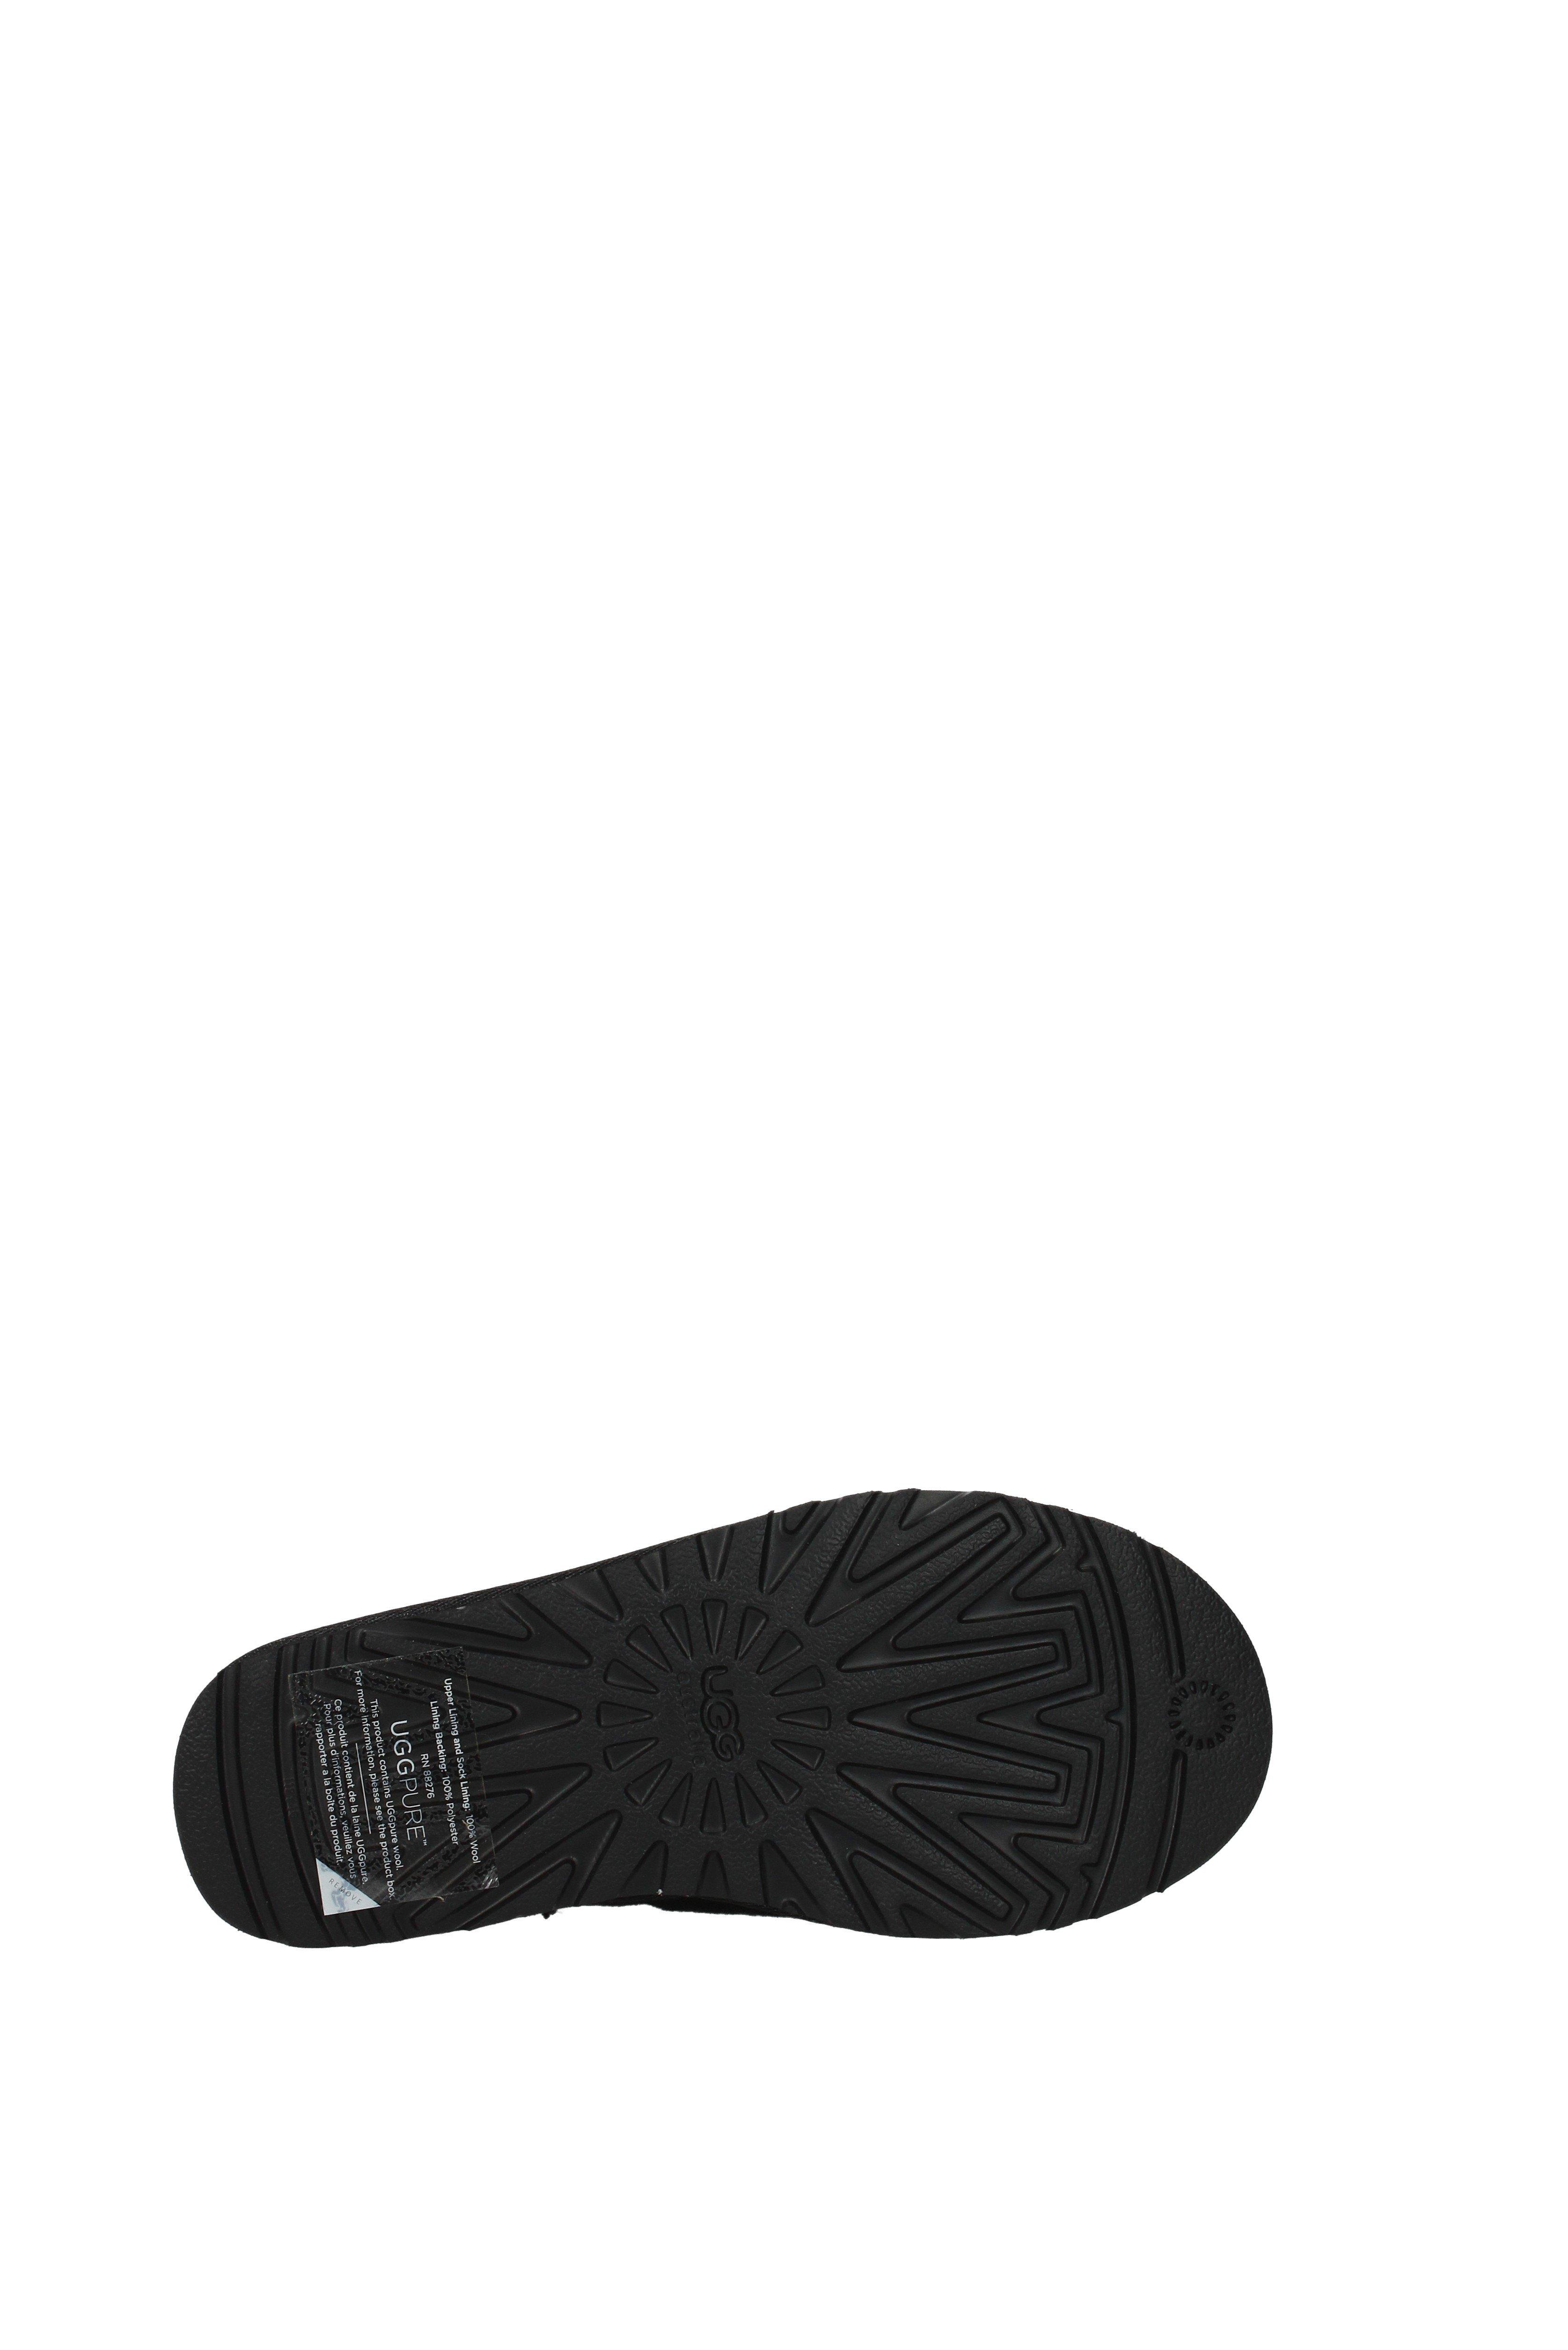 classic uggpure lined water resistant slipper